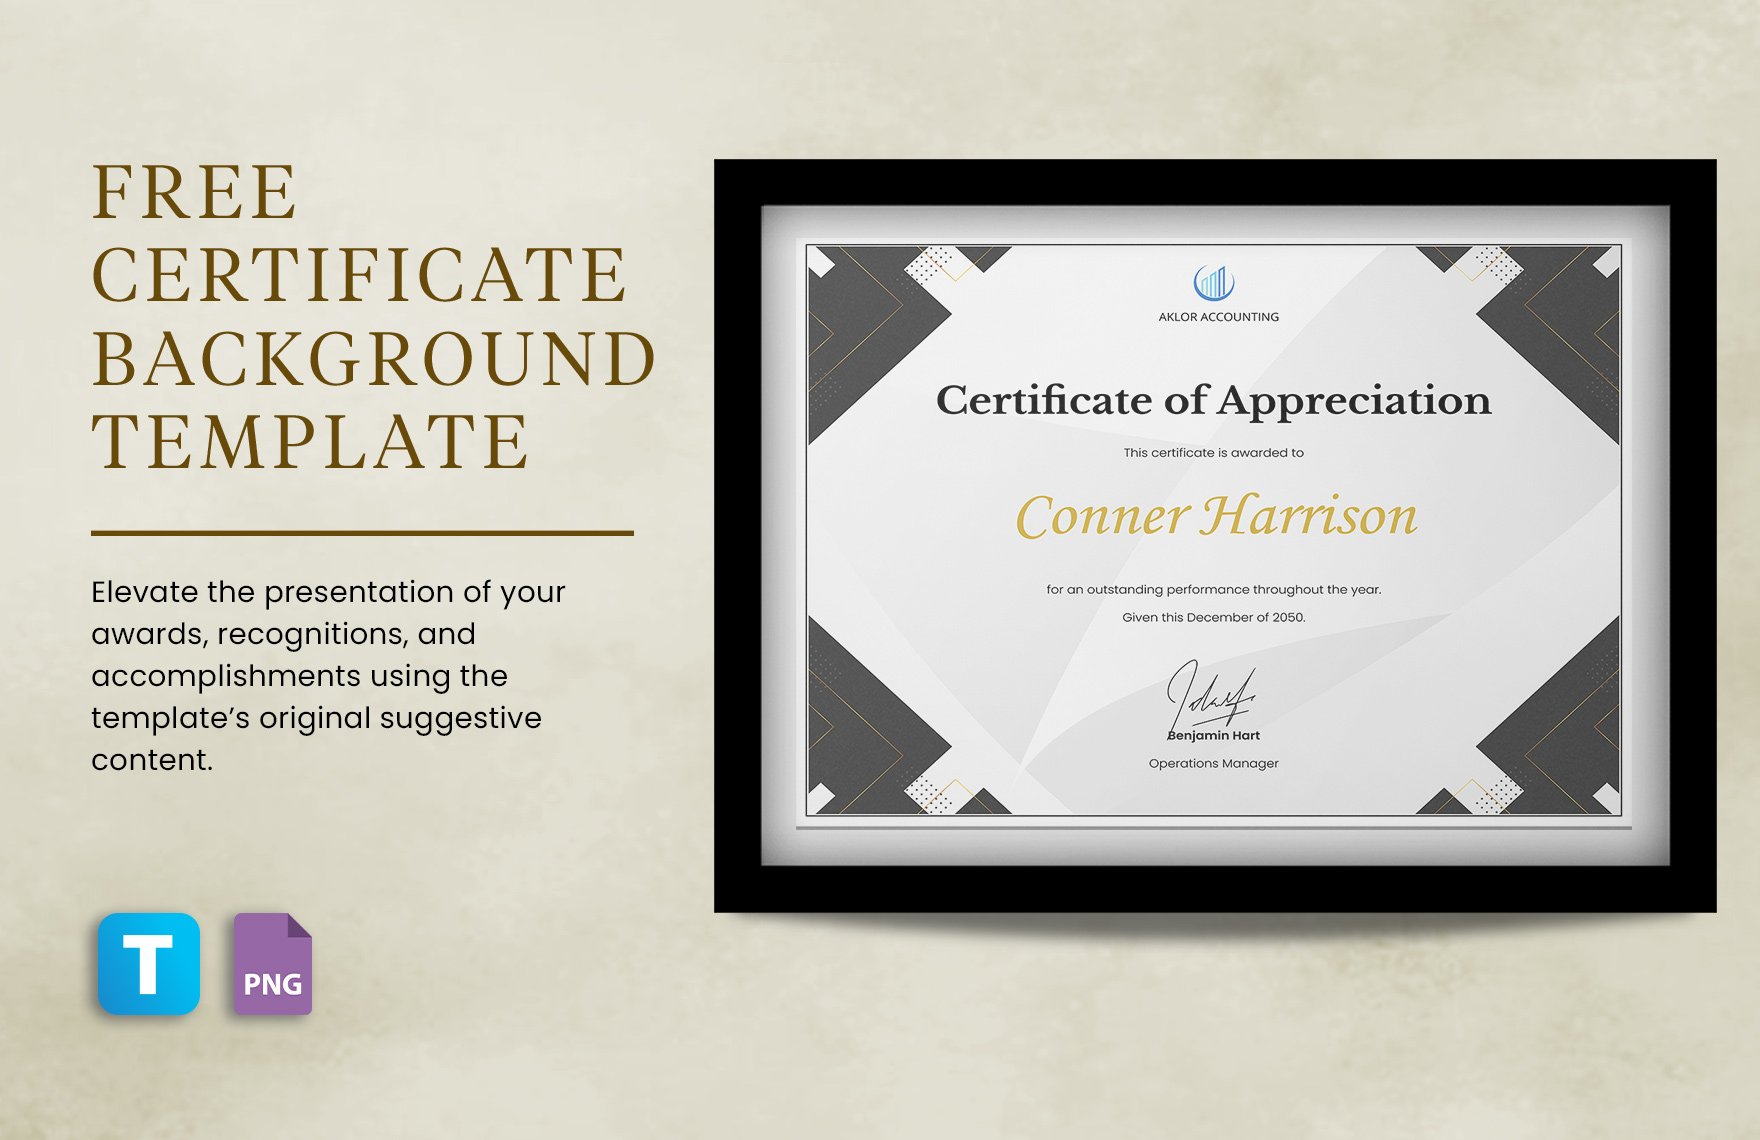 Certificate Background Template in PNG